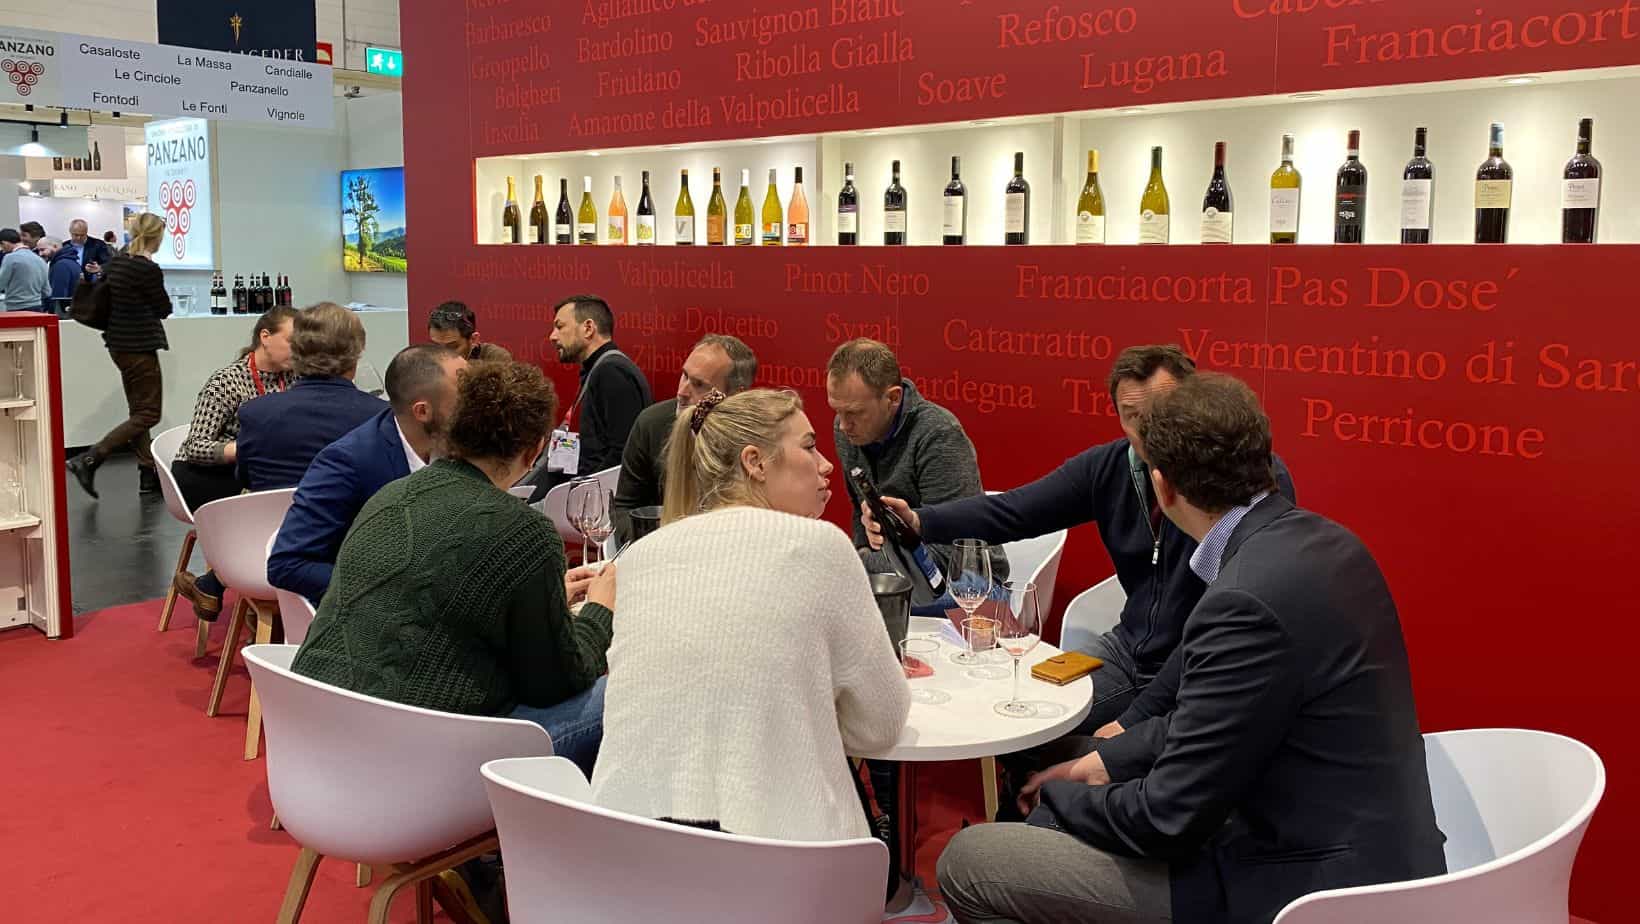 Our importer from the Netherlands at Prowein 2023.